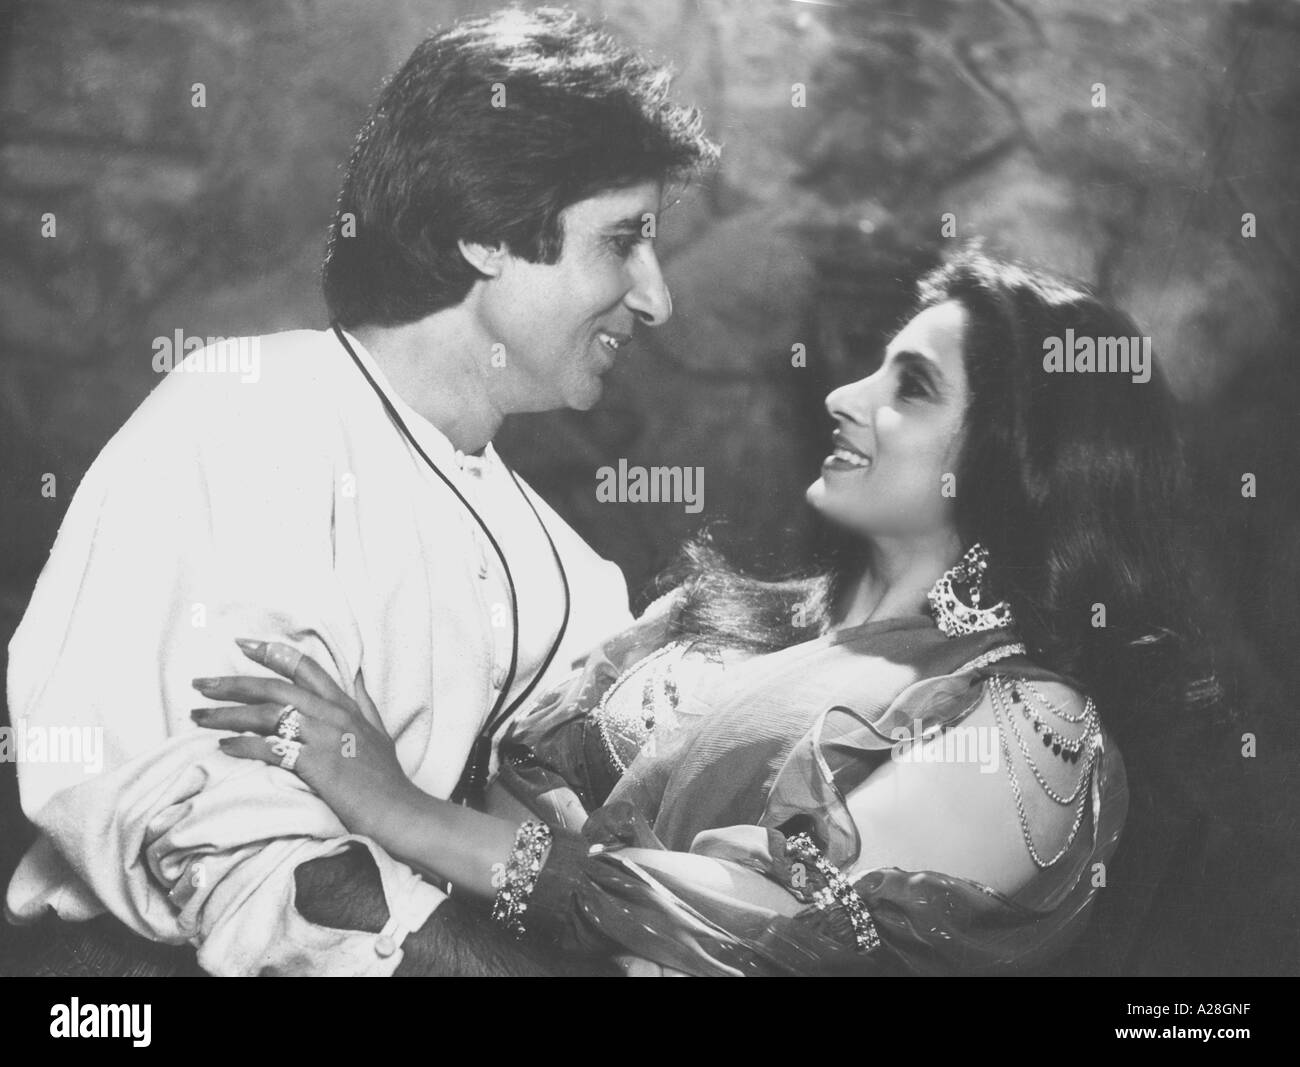 Old vintage 1900s Bollywood Film Star Indian Actor Amitabh Bachchan with actress Dimple Kapadia in Hindi Movie Ajooba India Asia Stock Photo